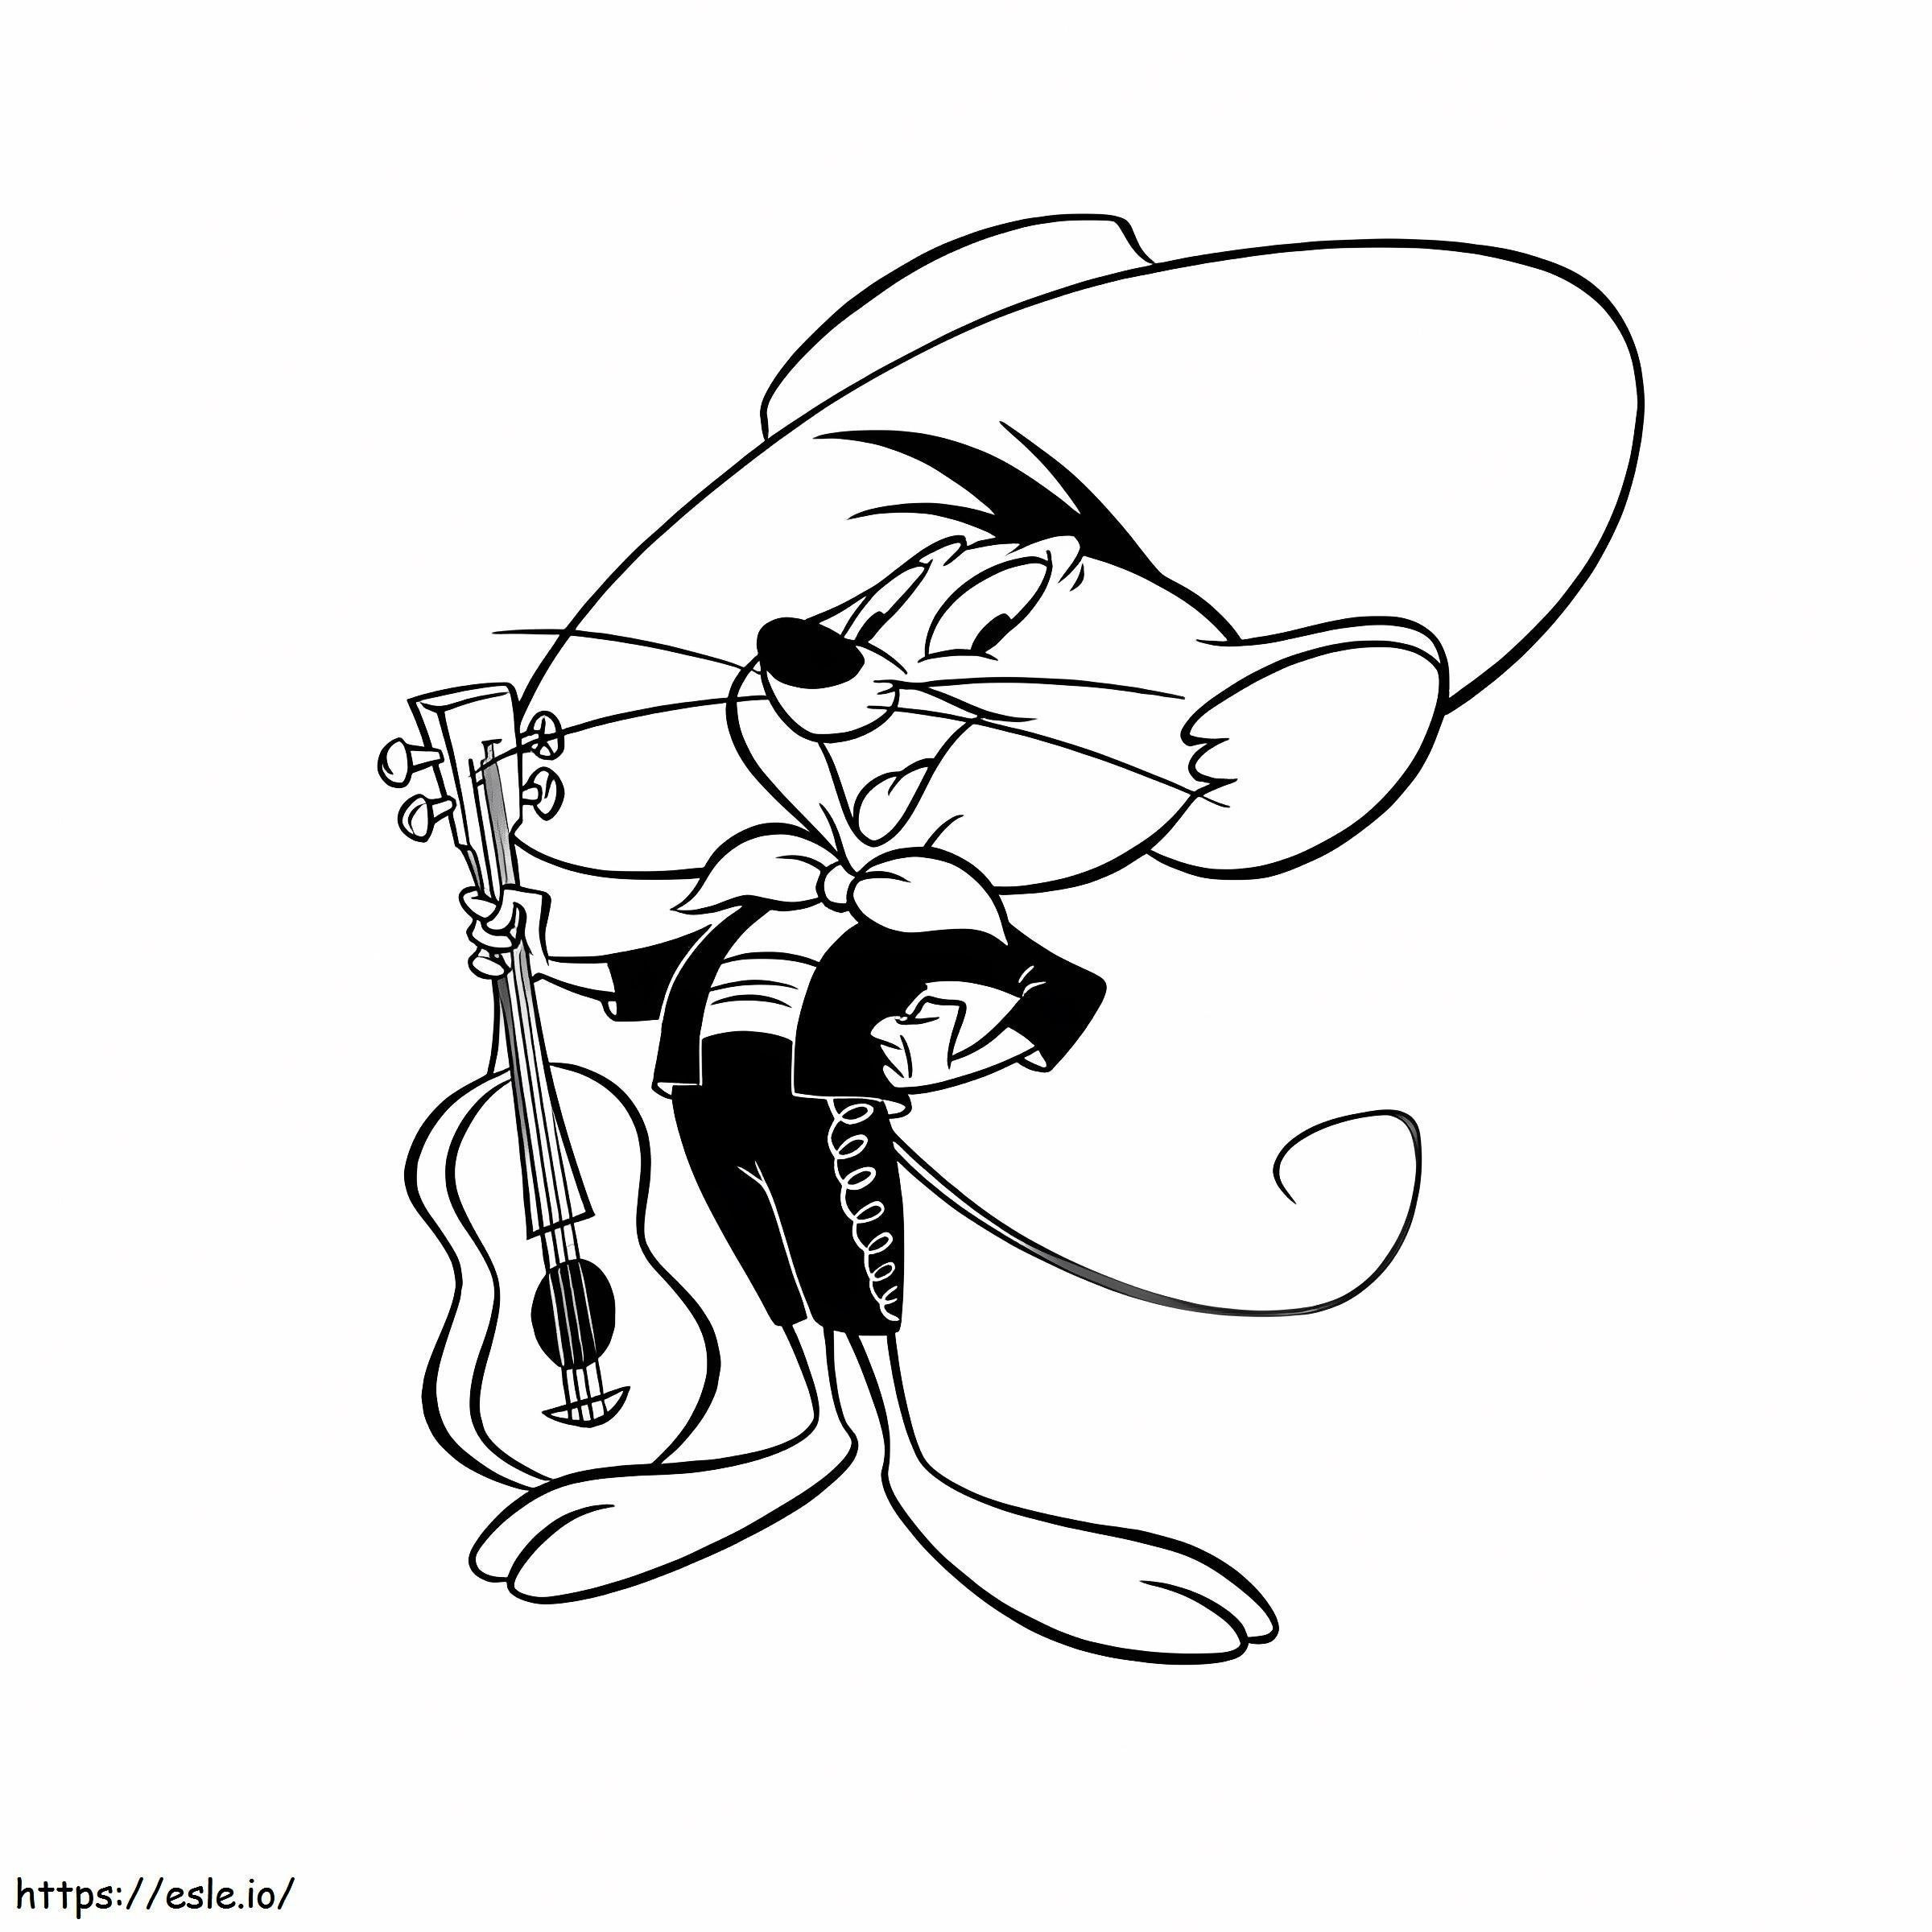 Speedy Gonzales With Guitar coloring page